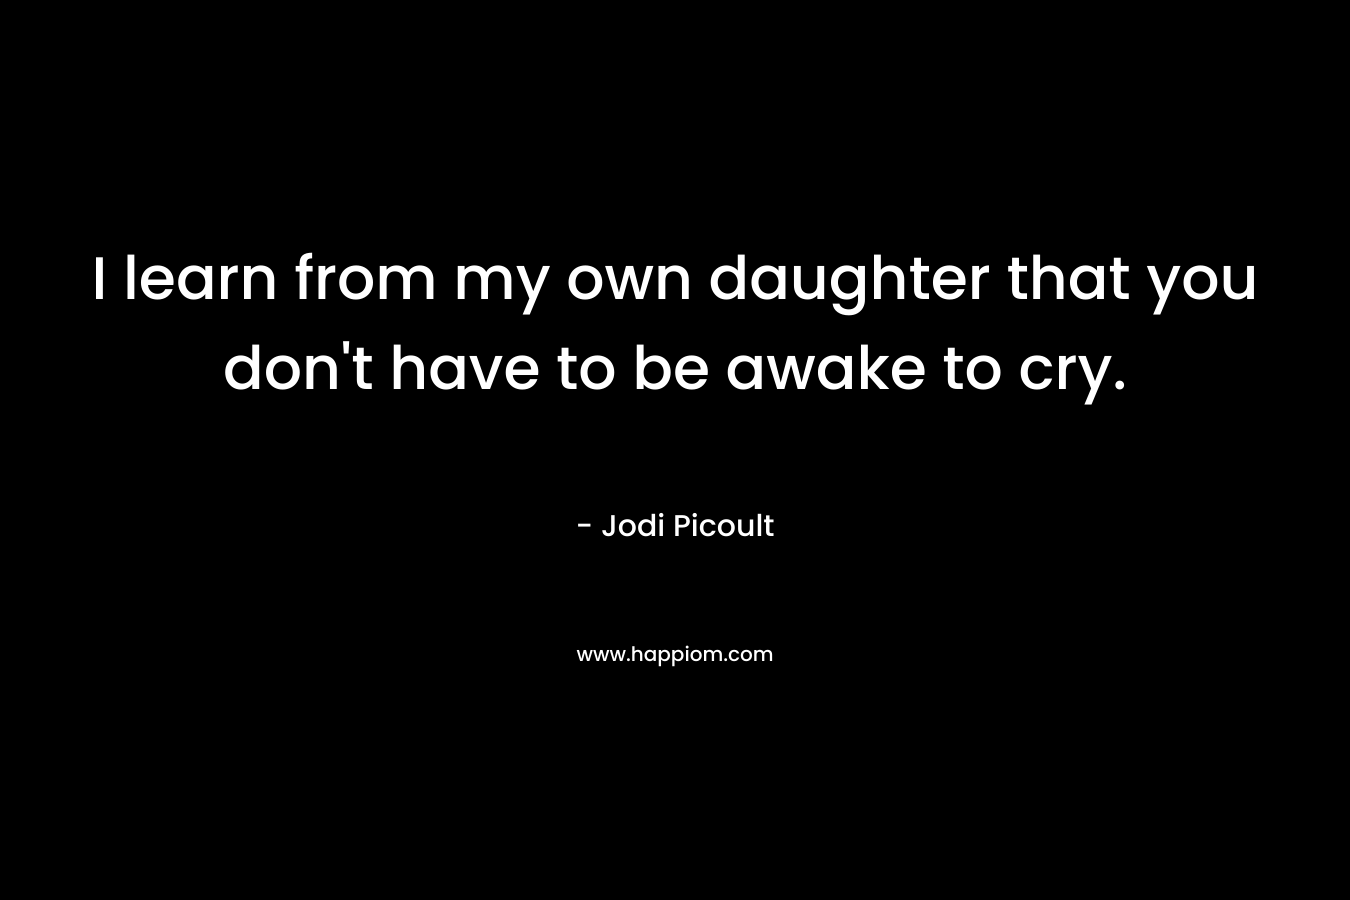 I learn from my own daughter that you don’t have to be awake to cry. – Jodi Picoult